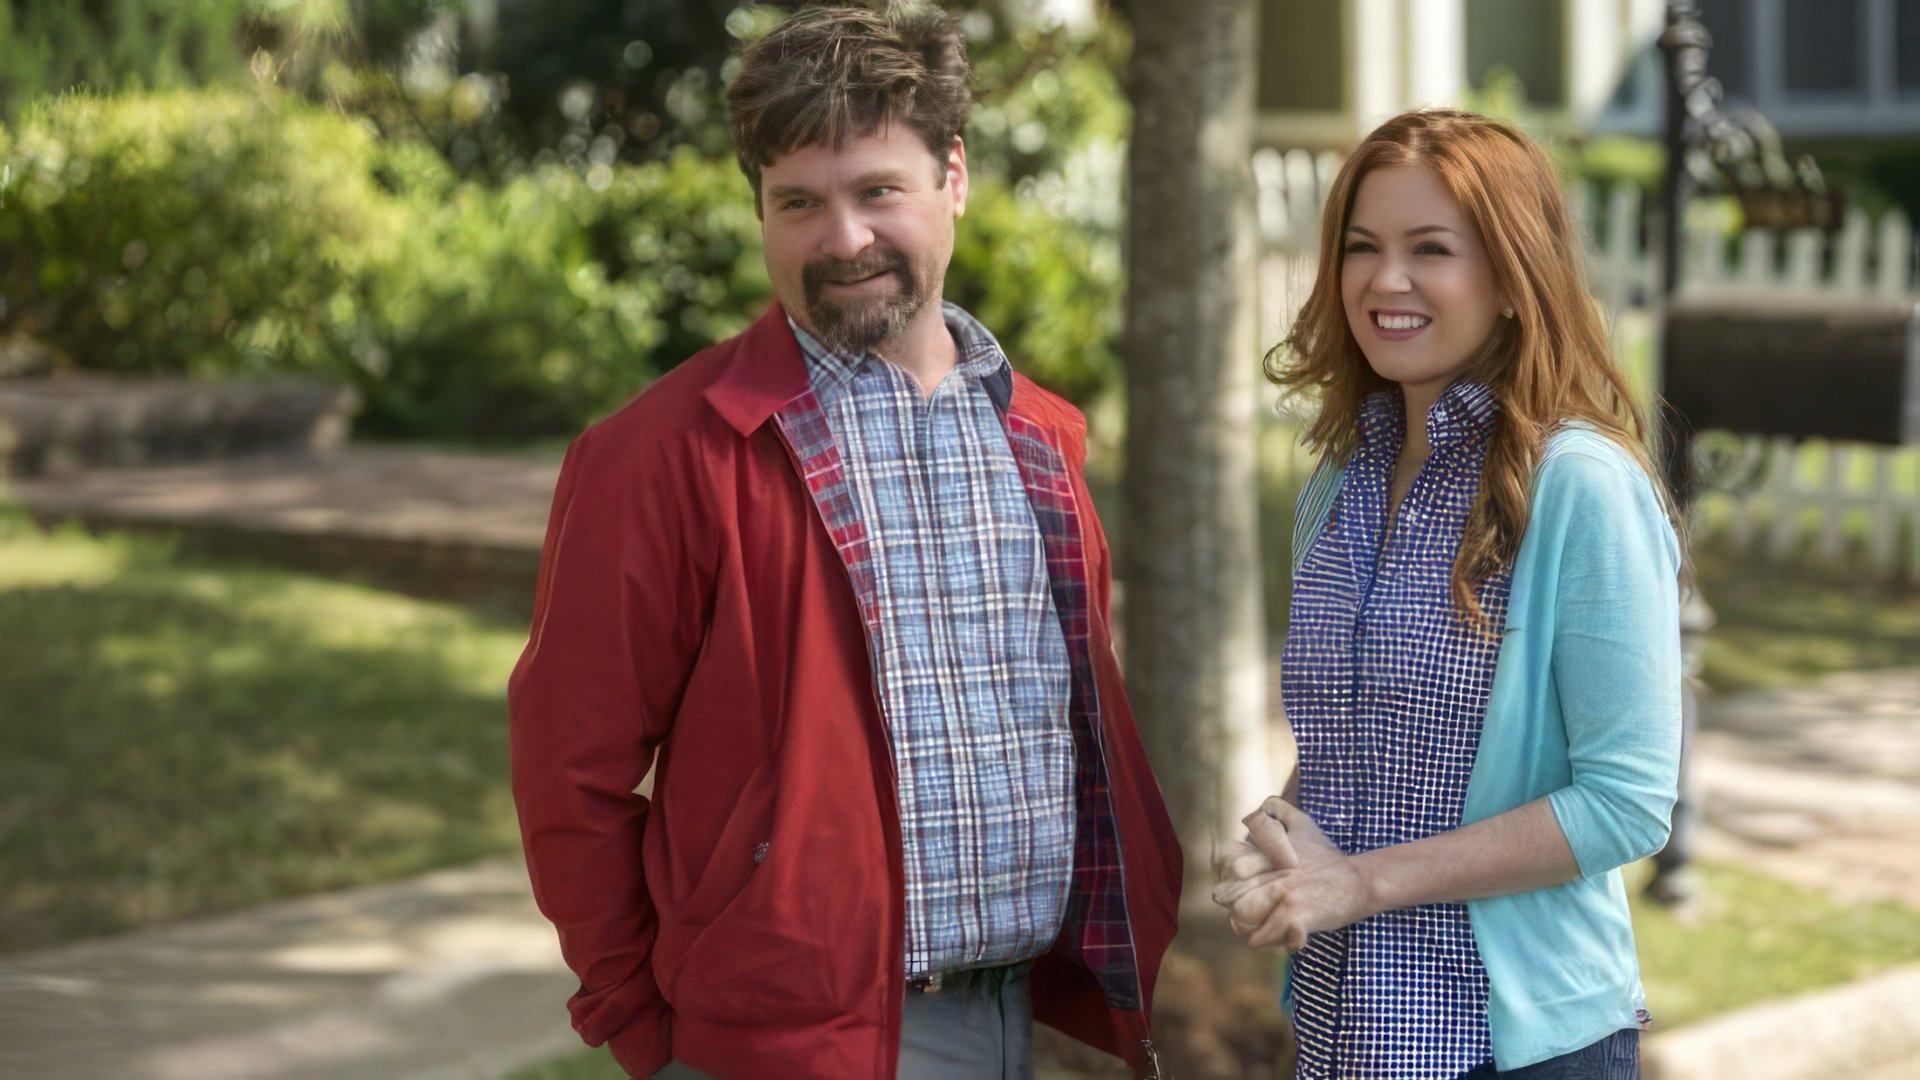  Zach Galifianakis and Isla Fisher in Keeping Up with the Joneses